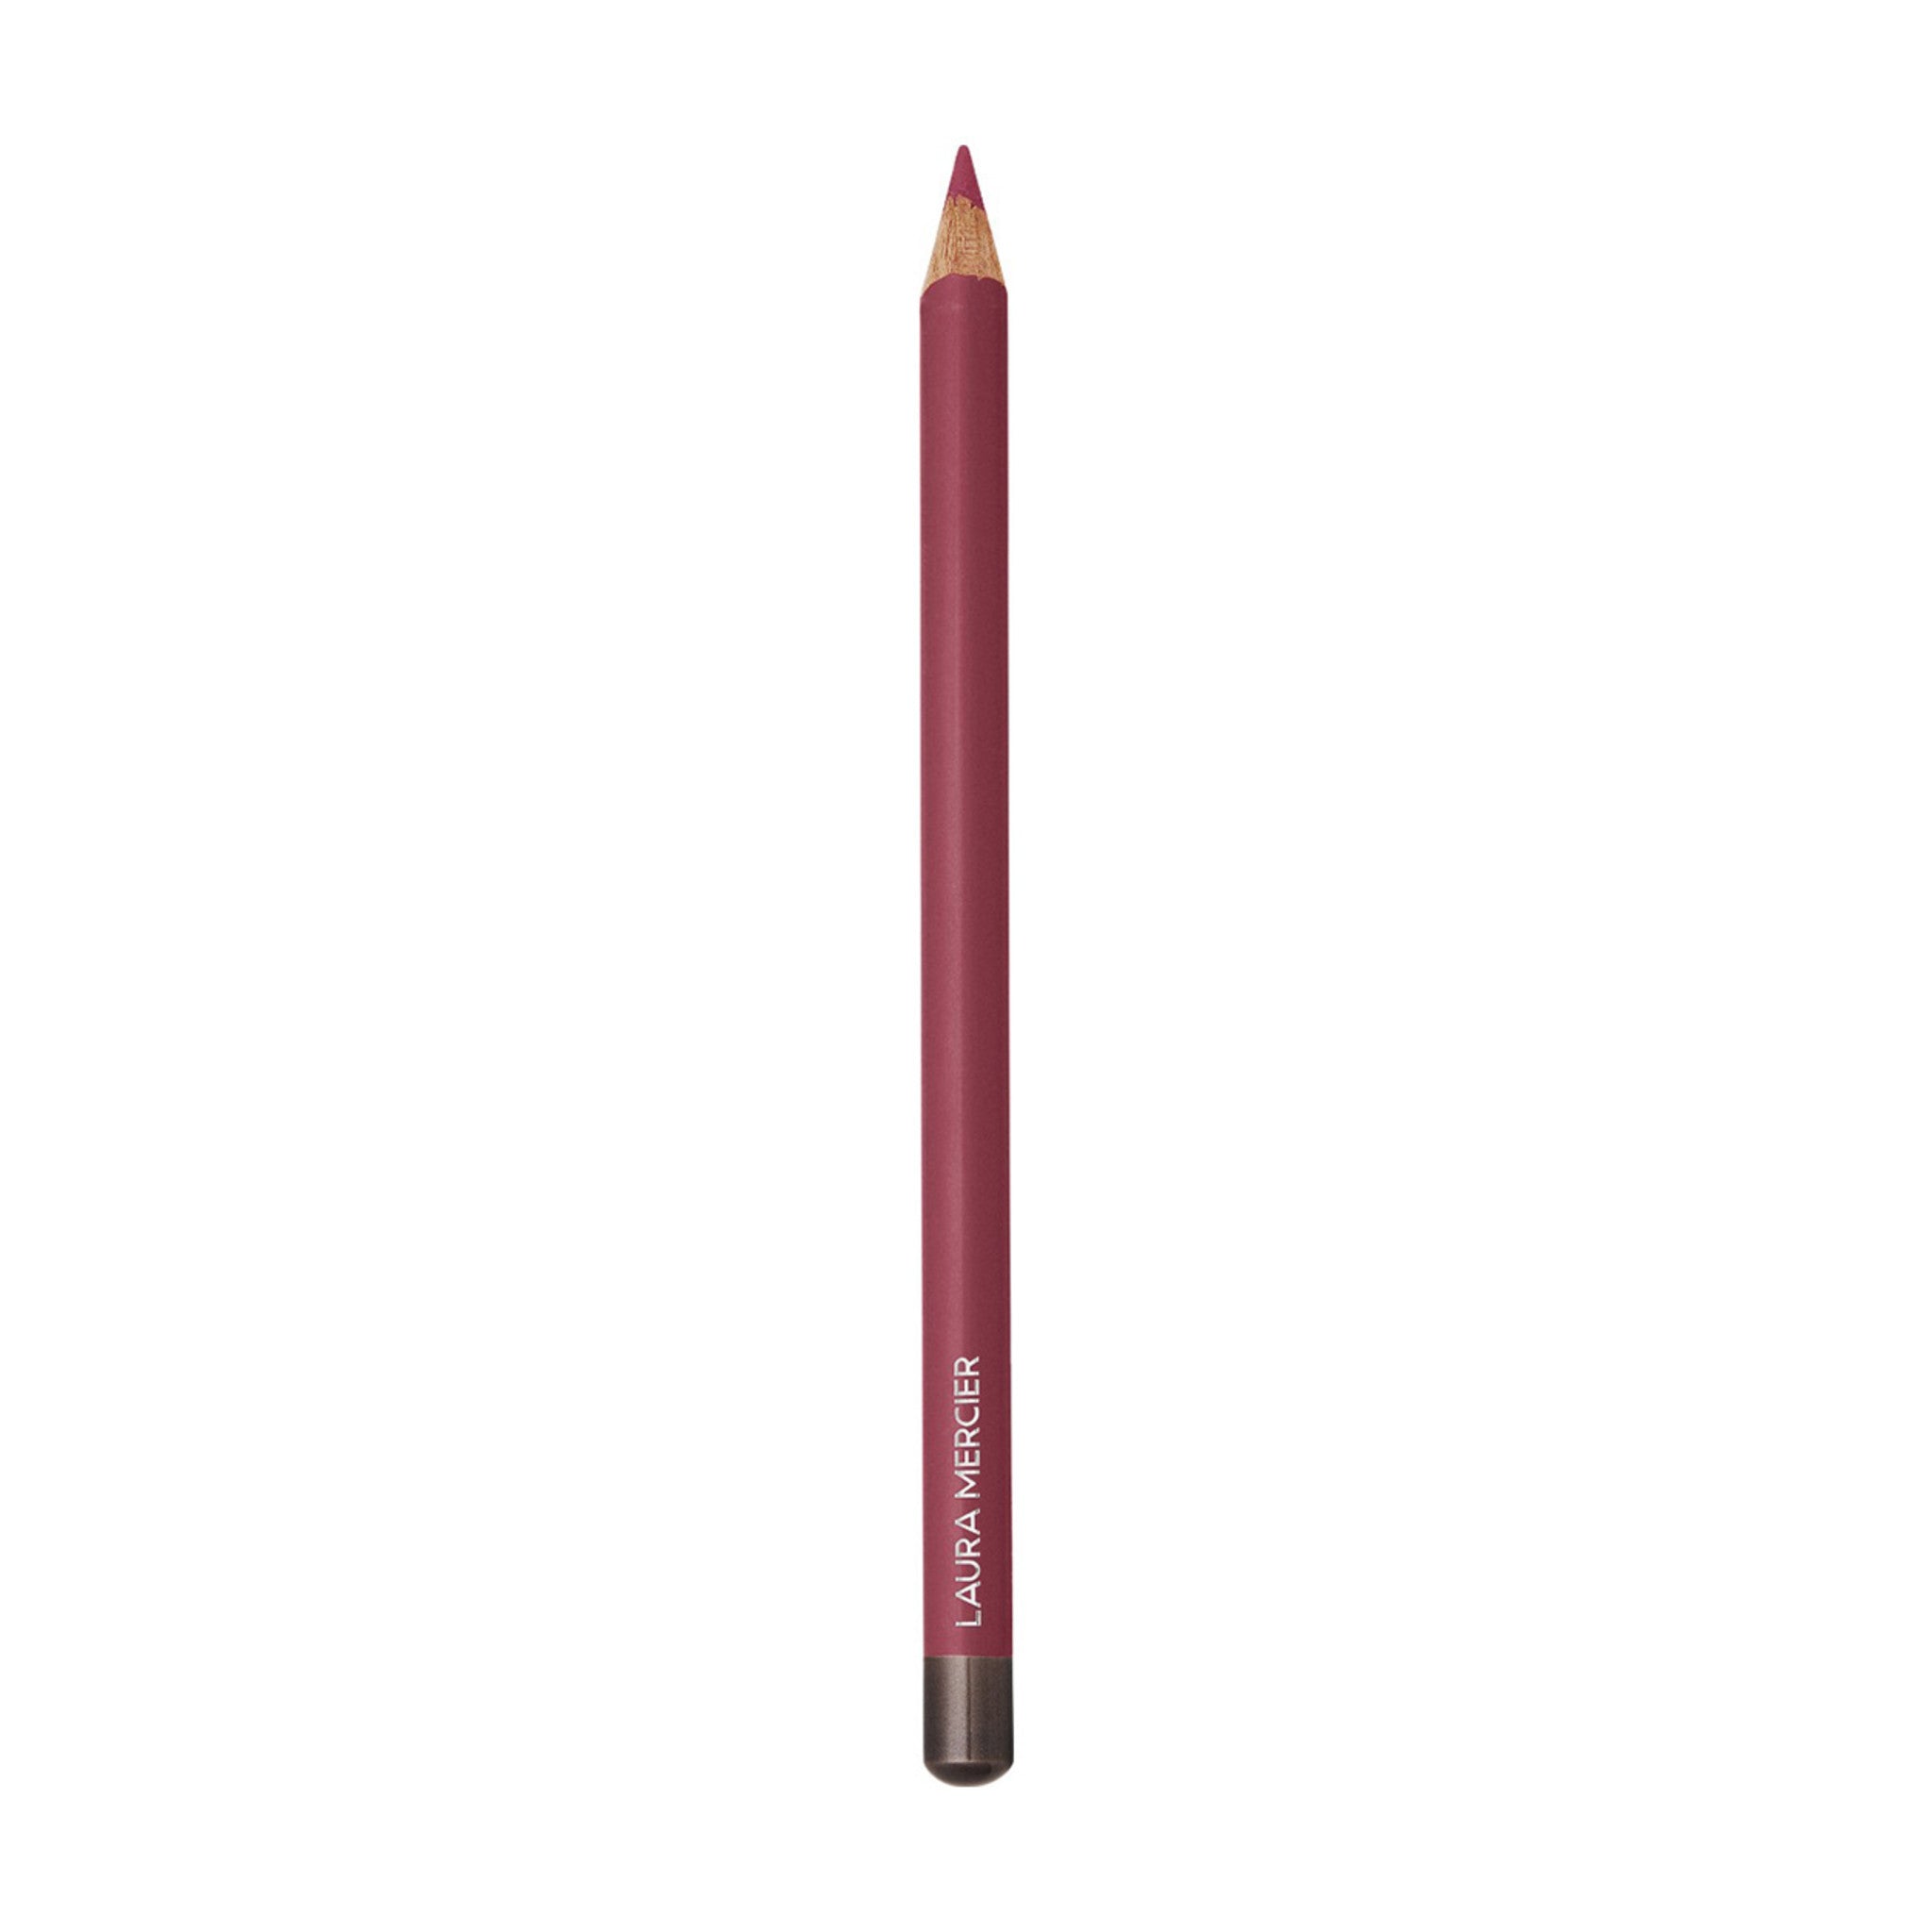 Laura Mercier Longwear Lip Liner Color/Shade variant: Pink Peony main image. This product is in the color pink